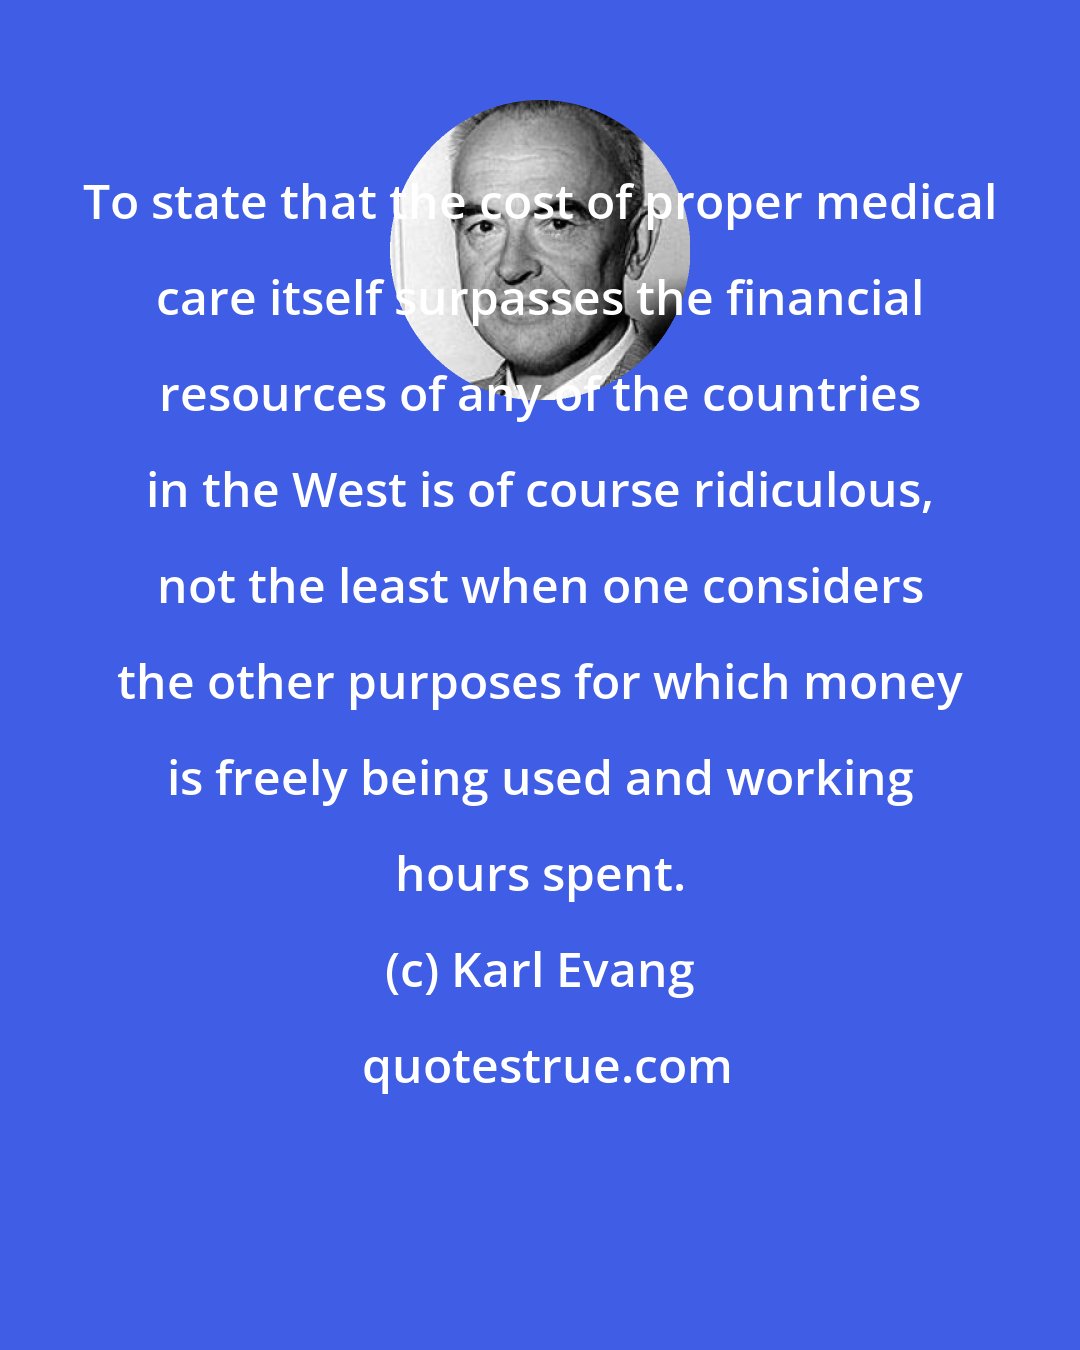 Karl Evang: To state that the cost of proper medical care itself surpasses the financial resources of any of the countries in the West is of course ridiculous, not the least when one considers the other purposes for which money is freely being used and working hours spent.